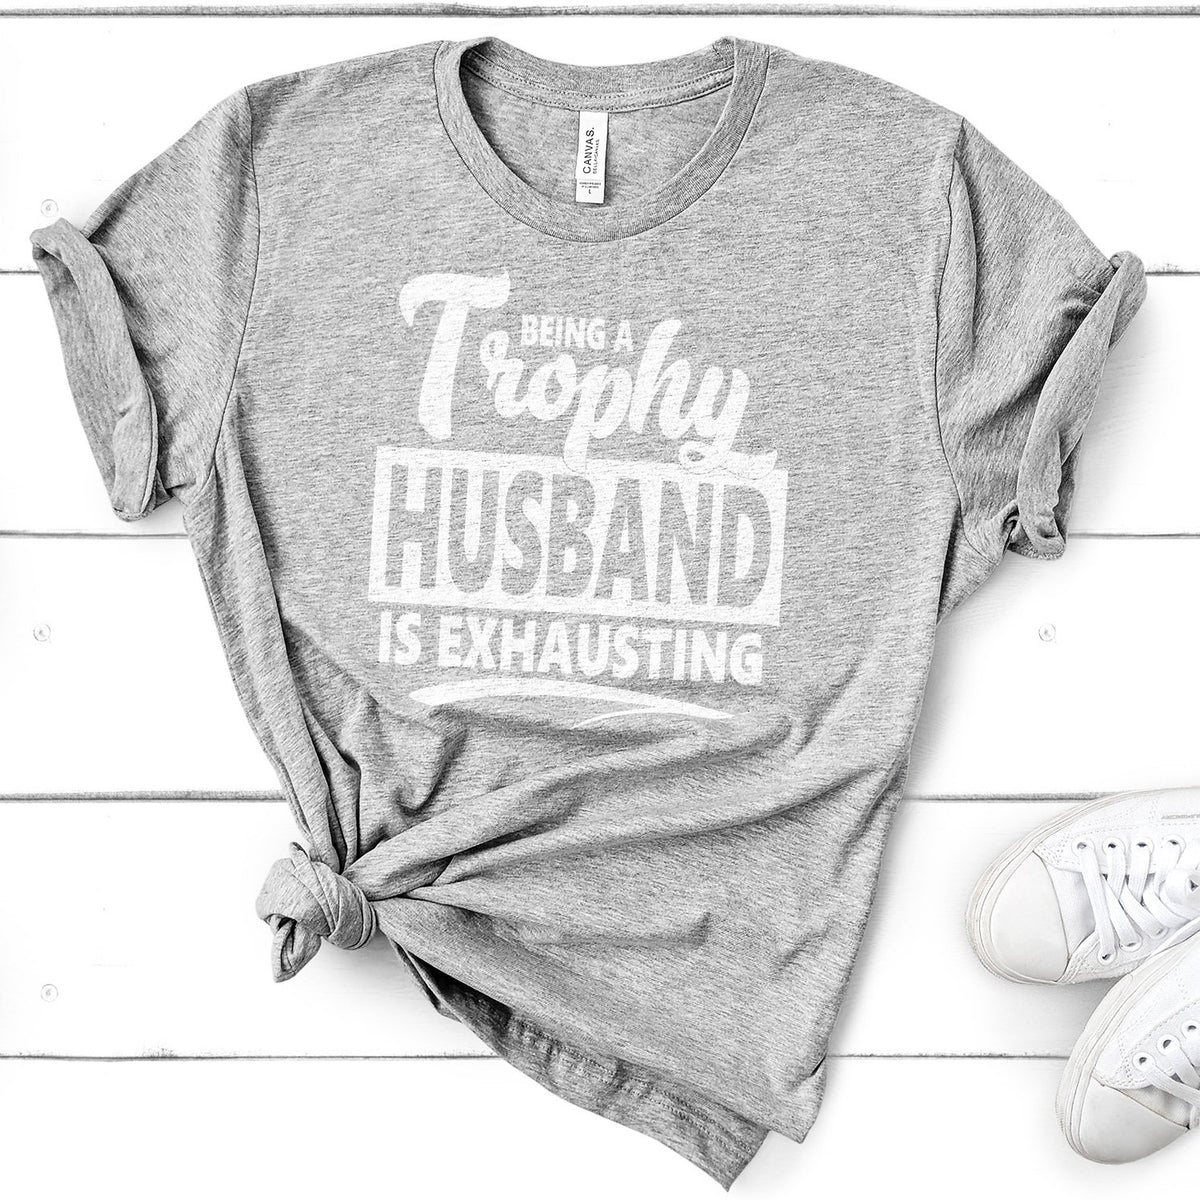 Being A Trophy Husband is Exhausting - Short Sleeve Tee Shirt